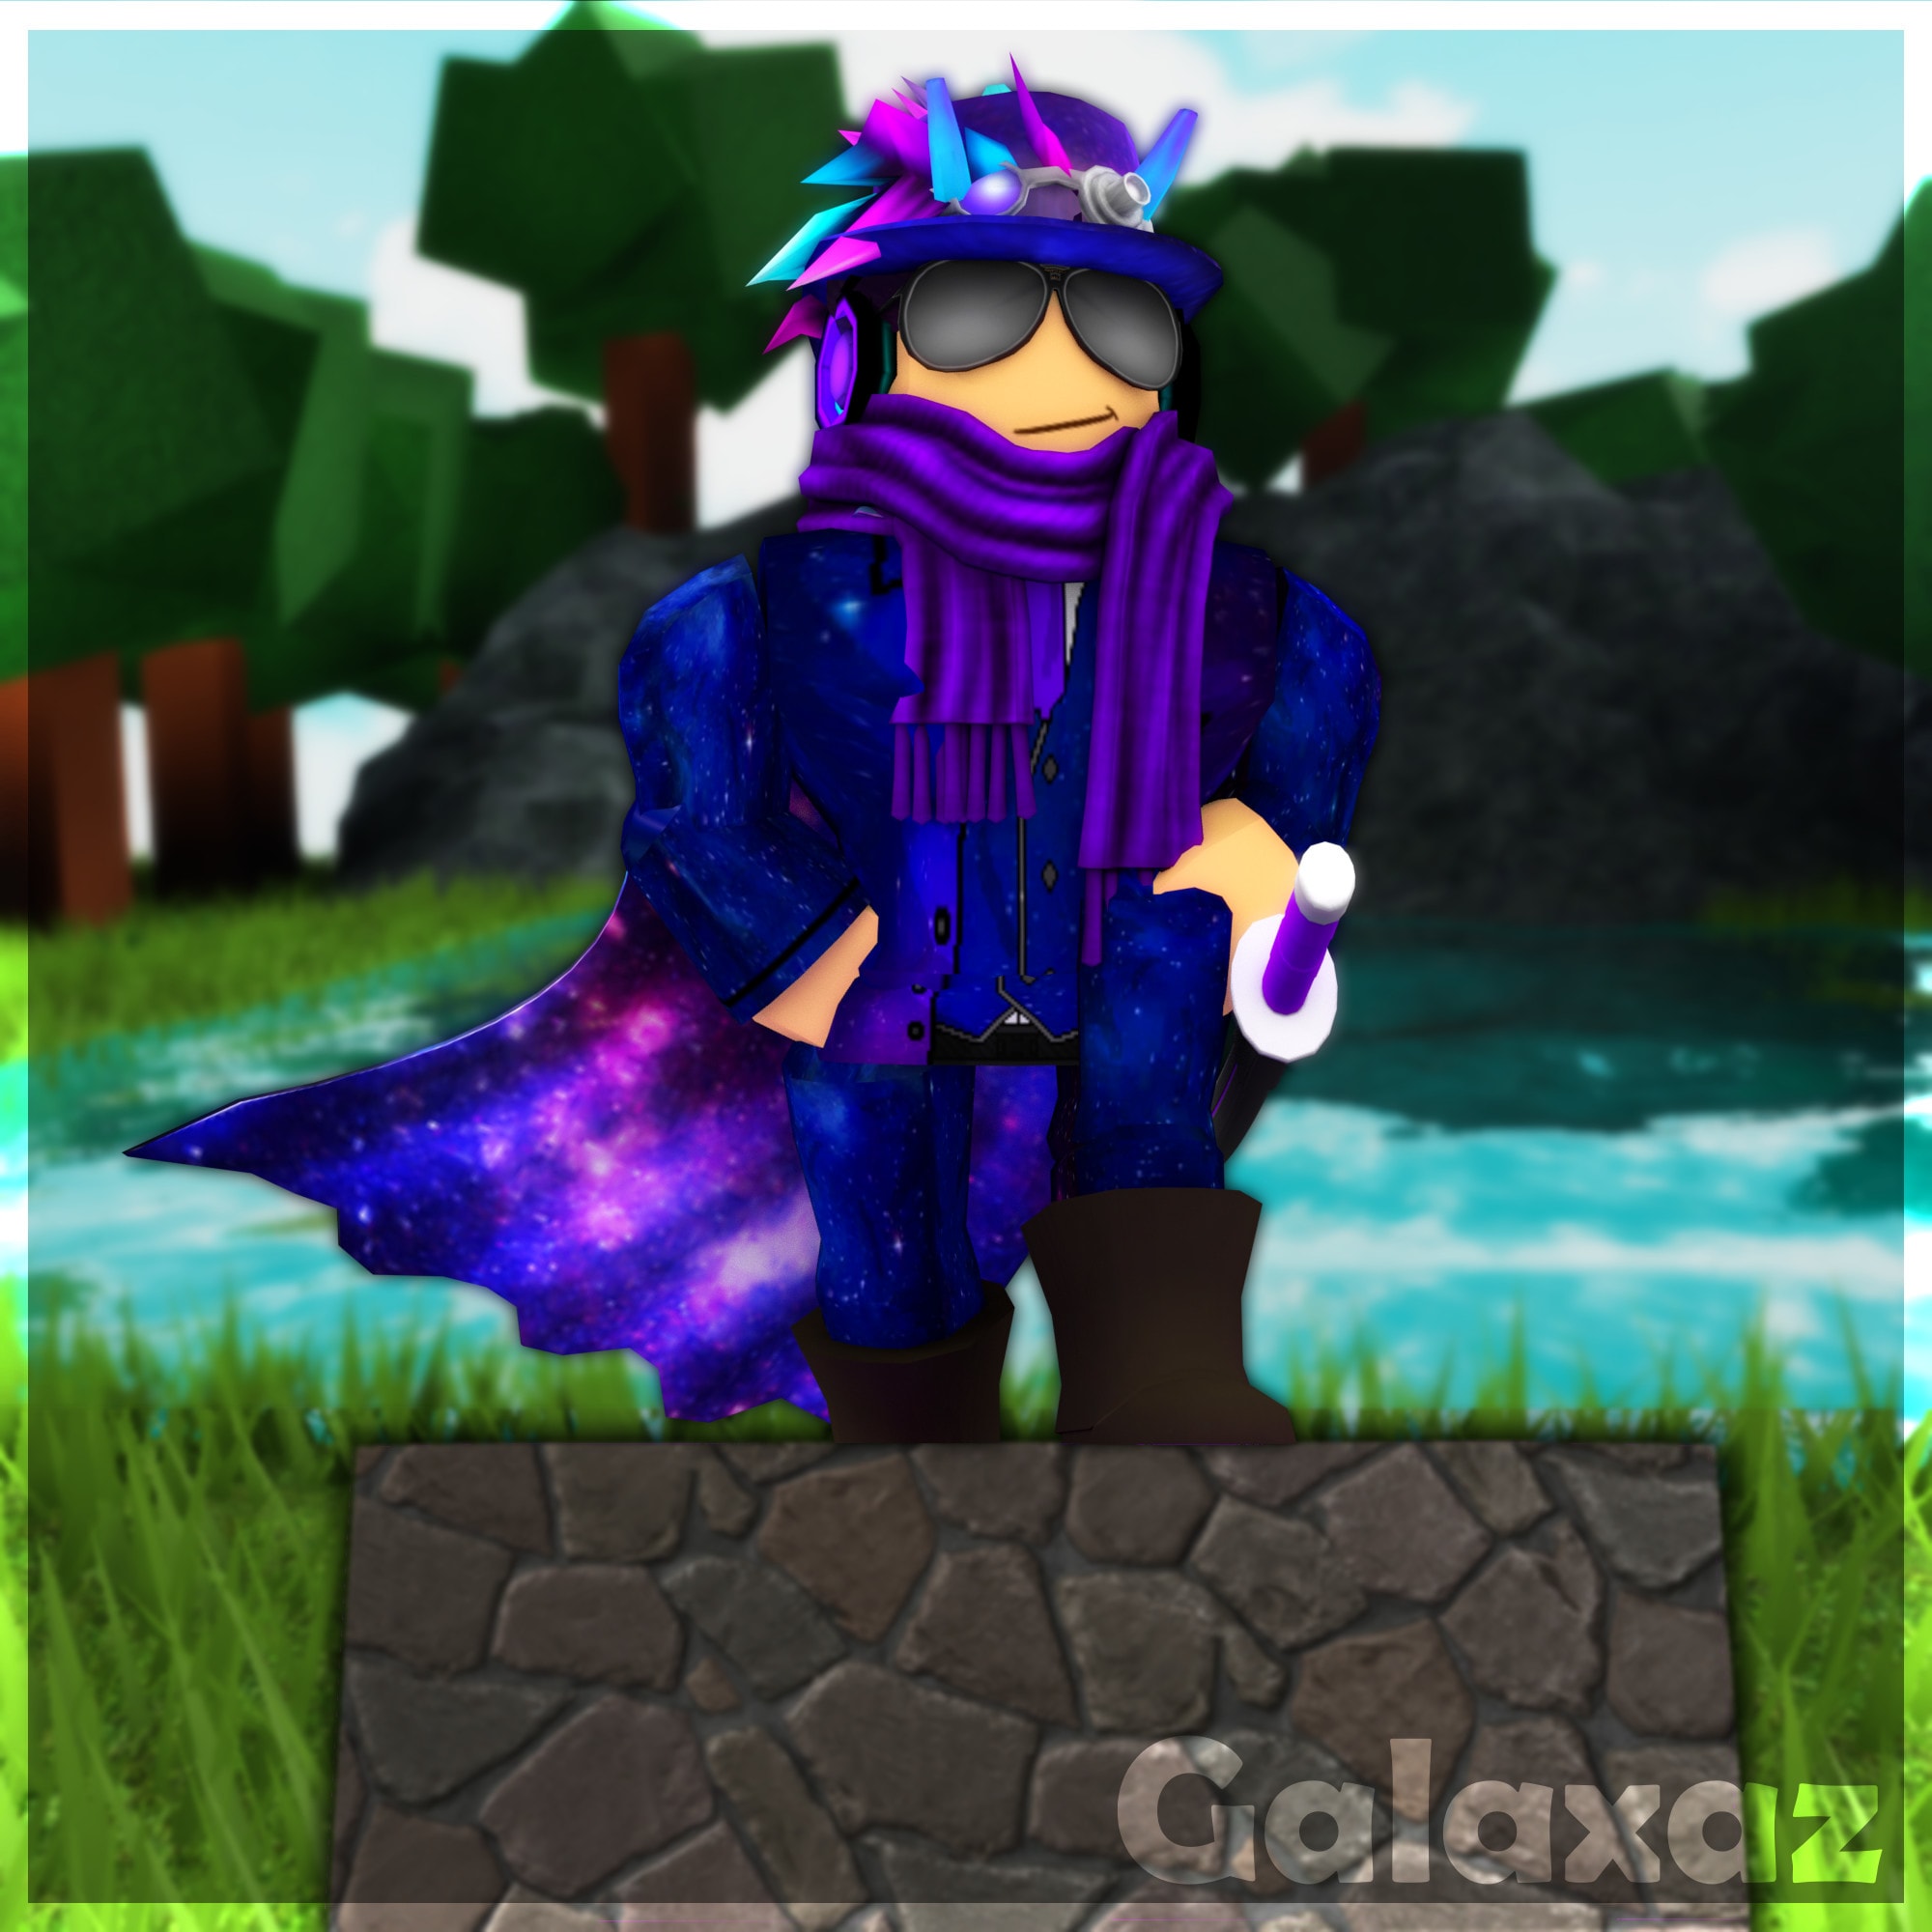 Create A Professional Roblox Gfx By Galaxaz - how to make a roblox gfx easy for beginners